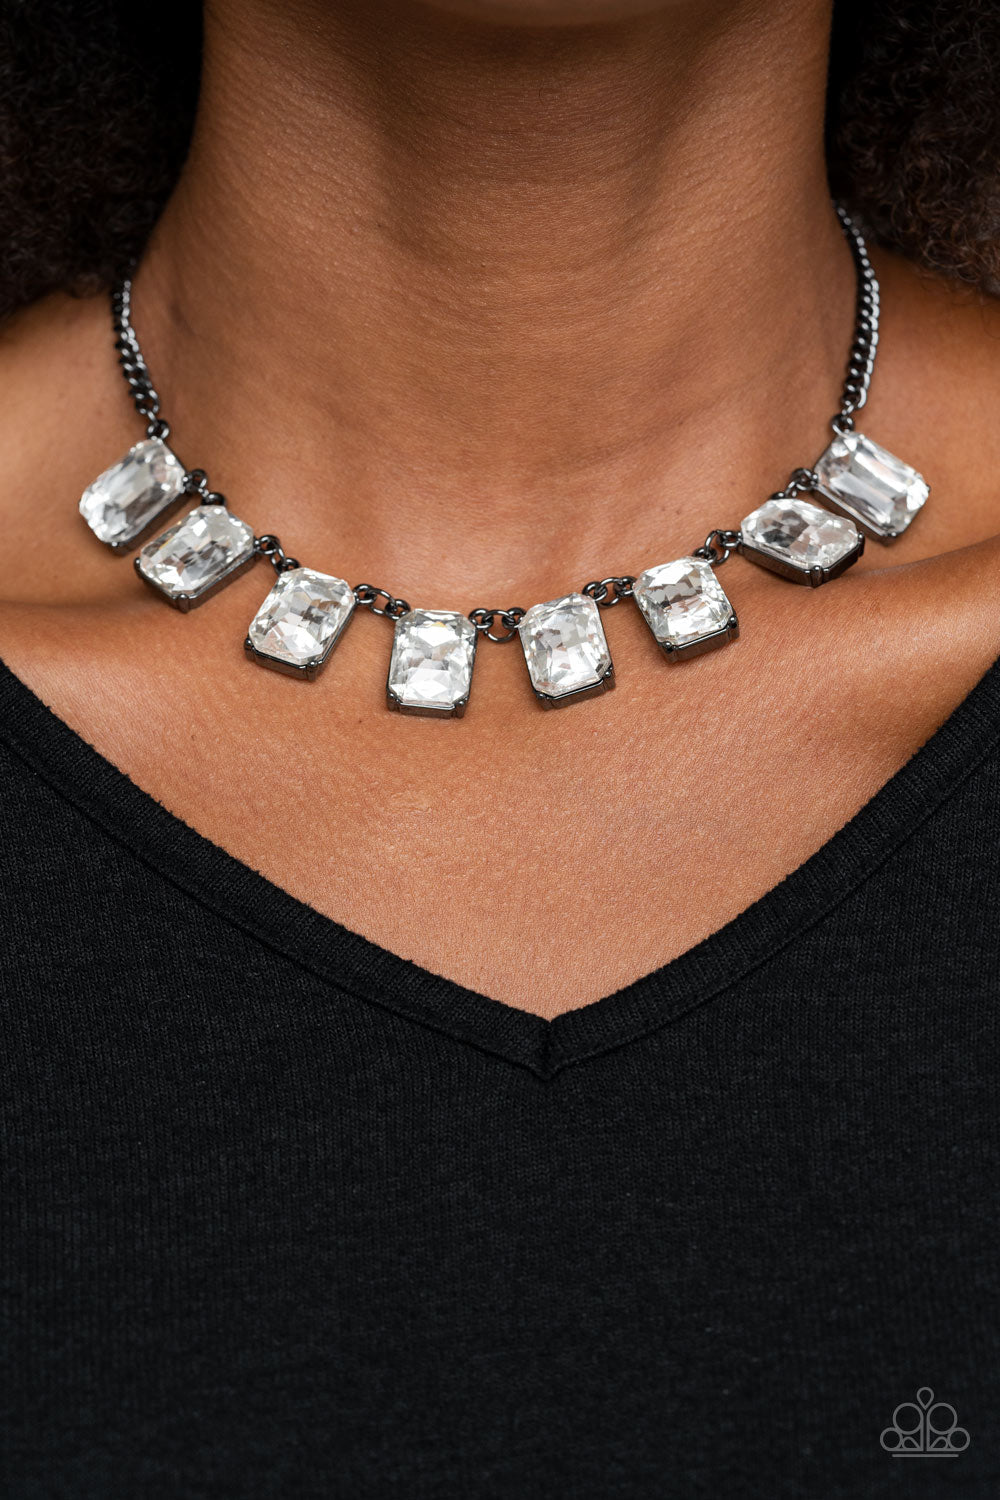 After Party Access - Black Gem Necklace - Paparazzi Accessories - Regal chain of oversized white emerald style gems link below the collar for a timeless finish. Features an adjustable clasp closure.